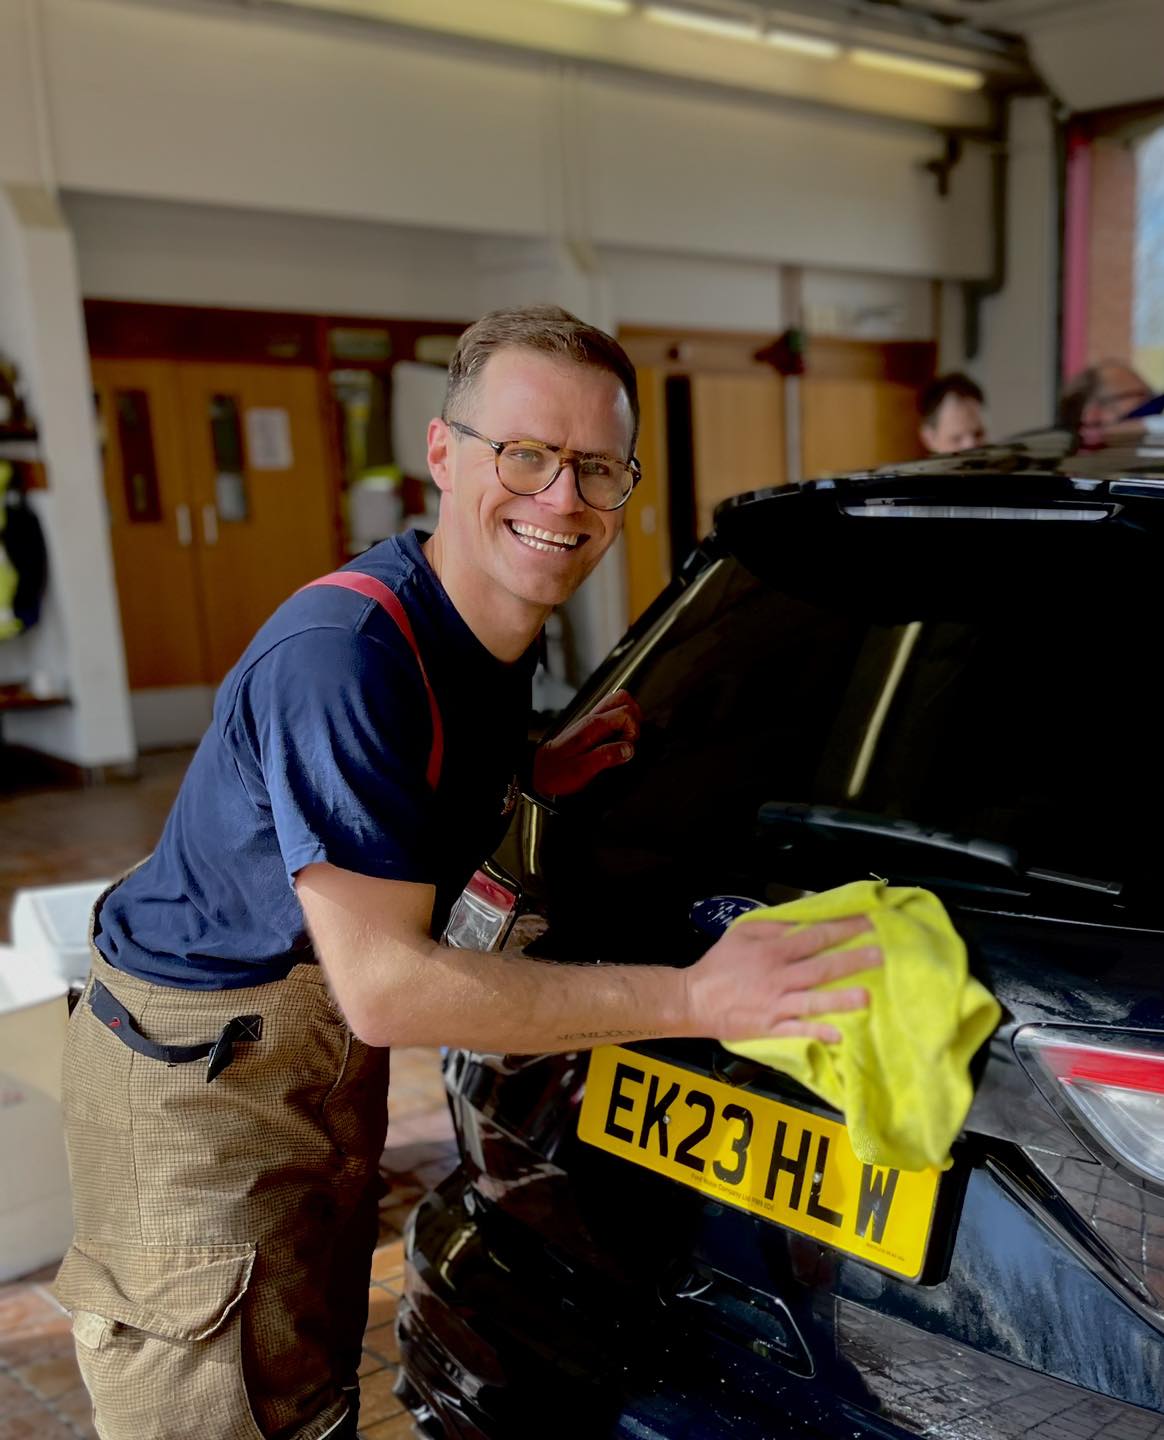 Firefighter Chris Kirby from Maldon Fire Station washing a car